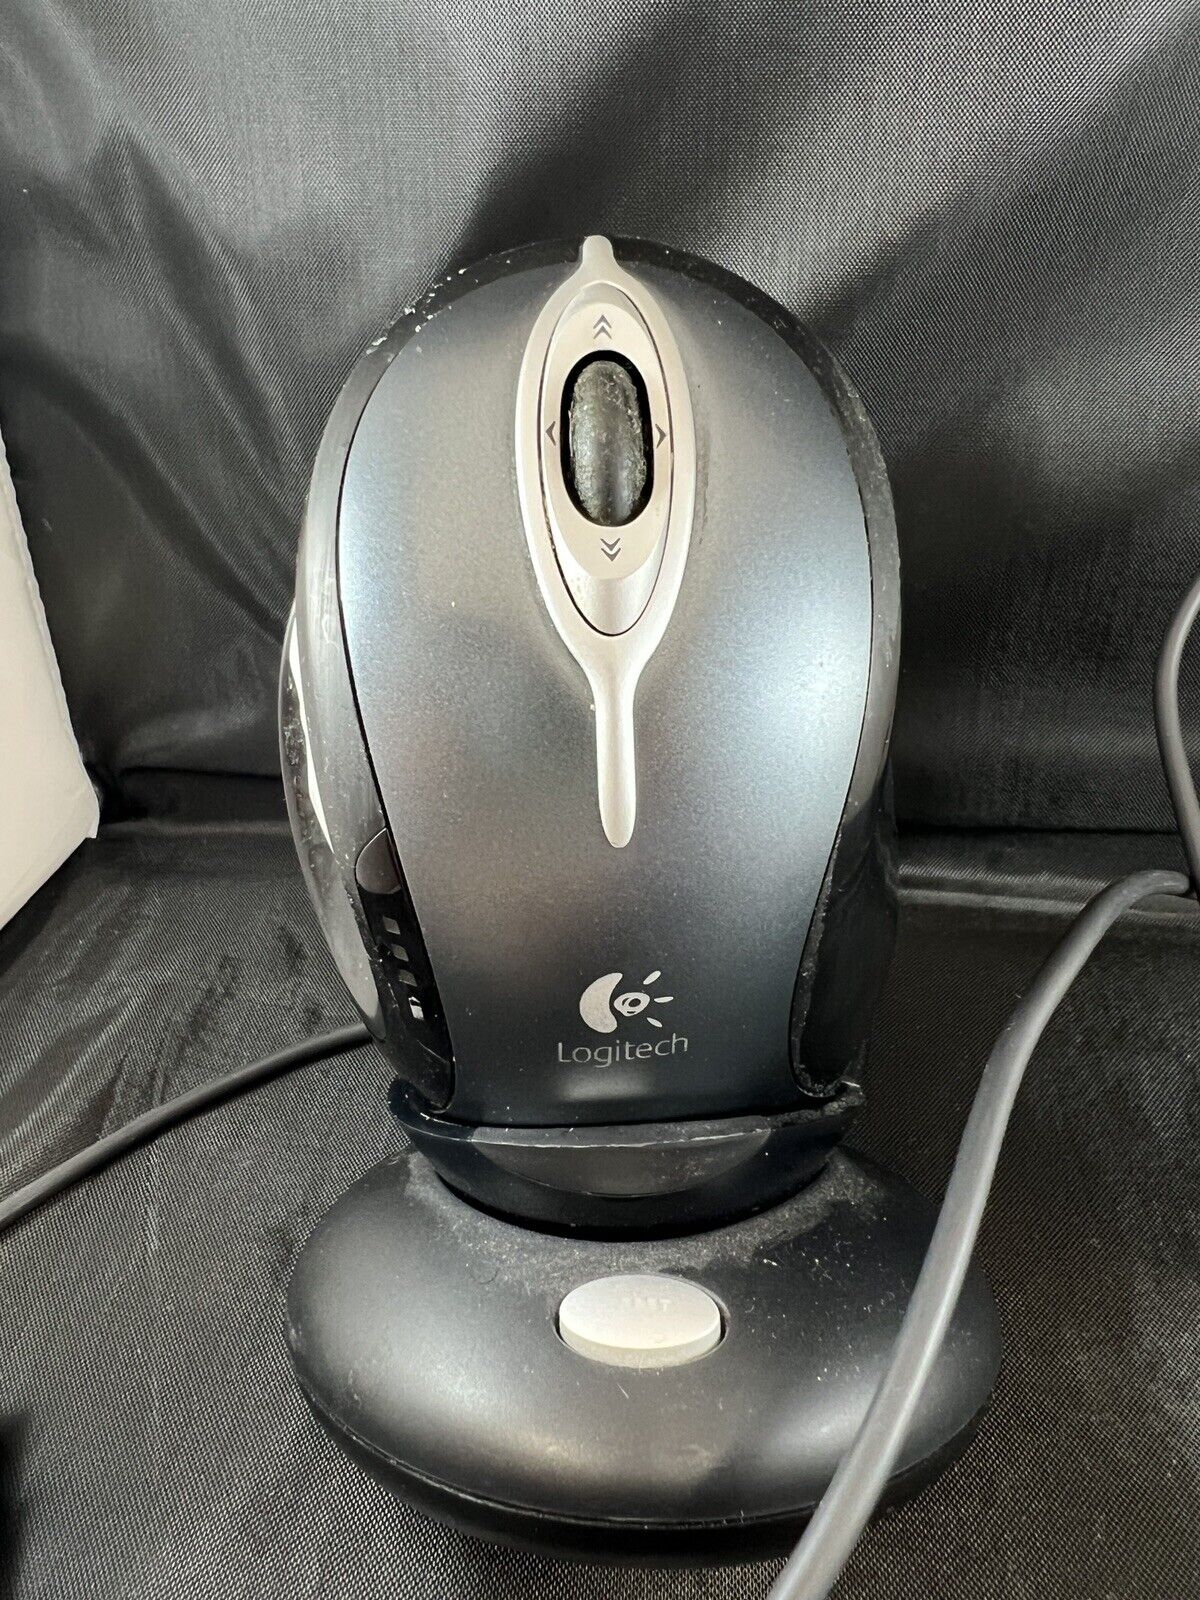 Logitech MX1000 Wireless Laser Mouse M-RAG97 & Receiver/Charger Tested